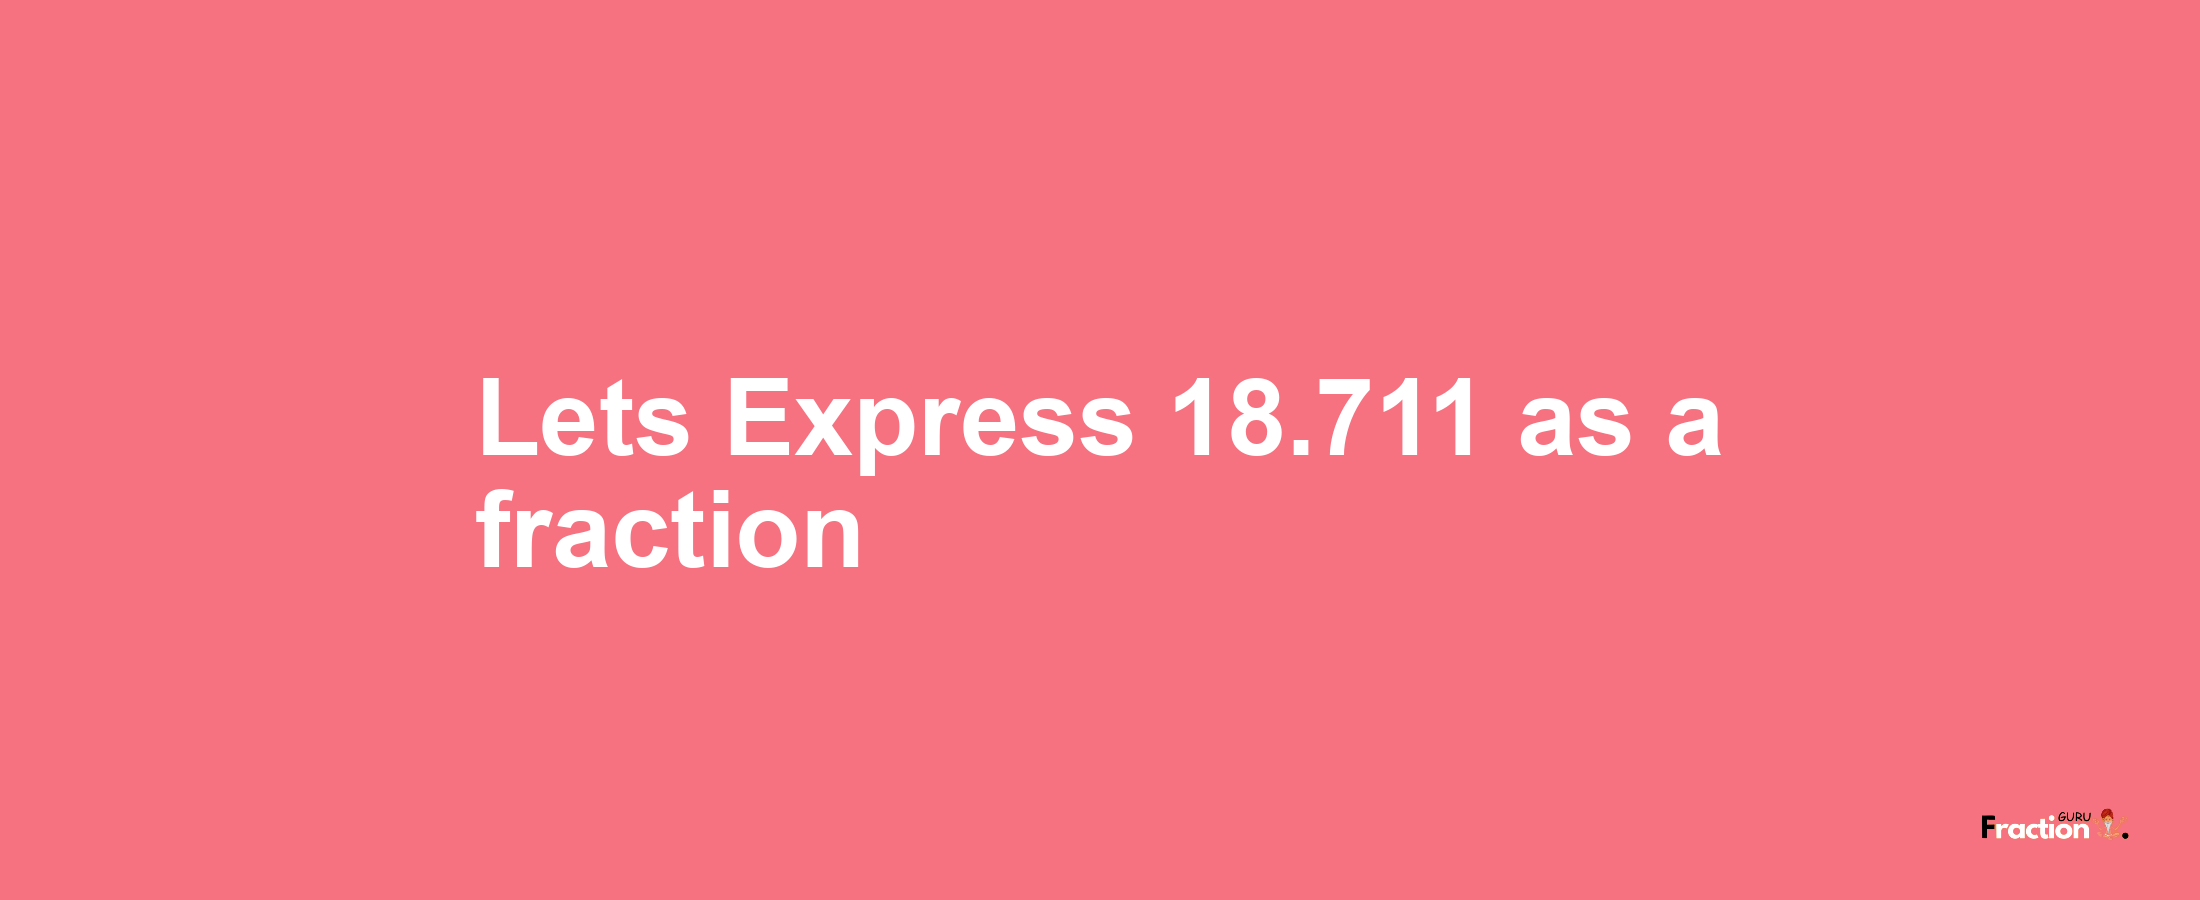 Lets Express 18.711 as afraction